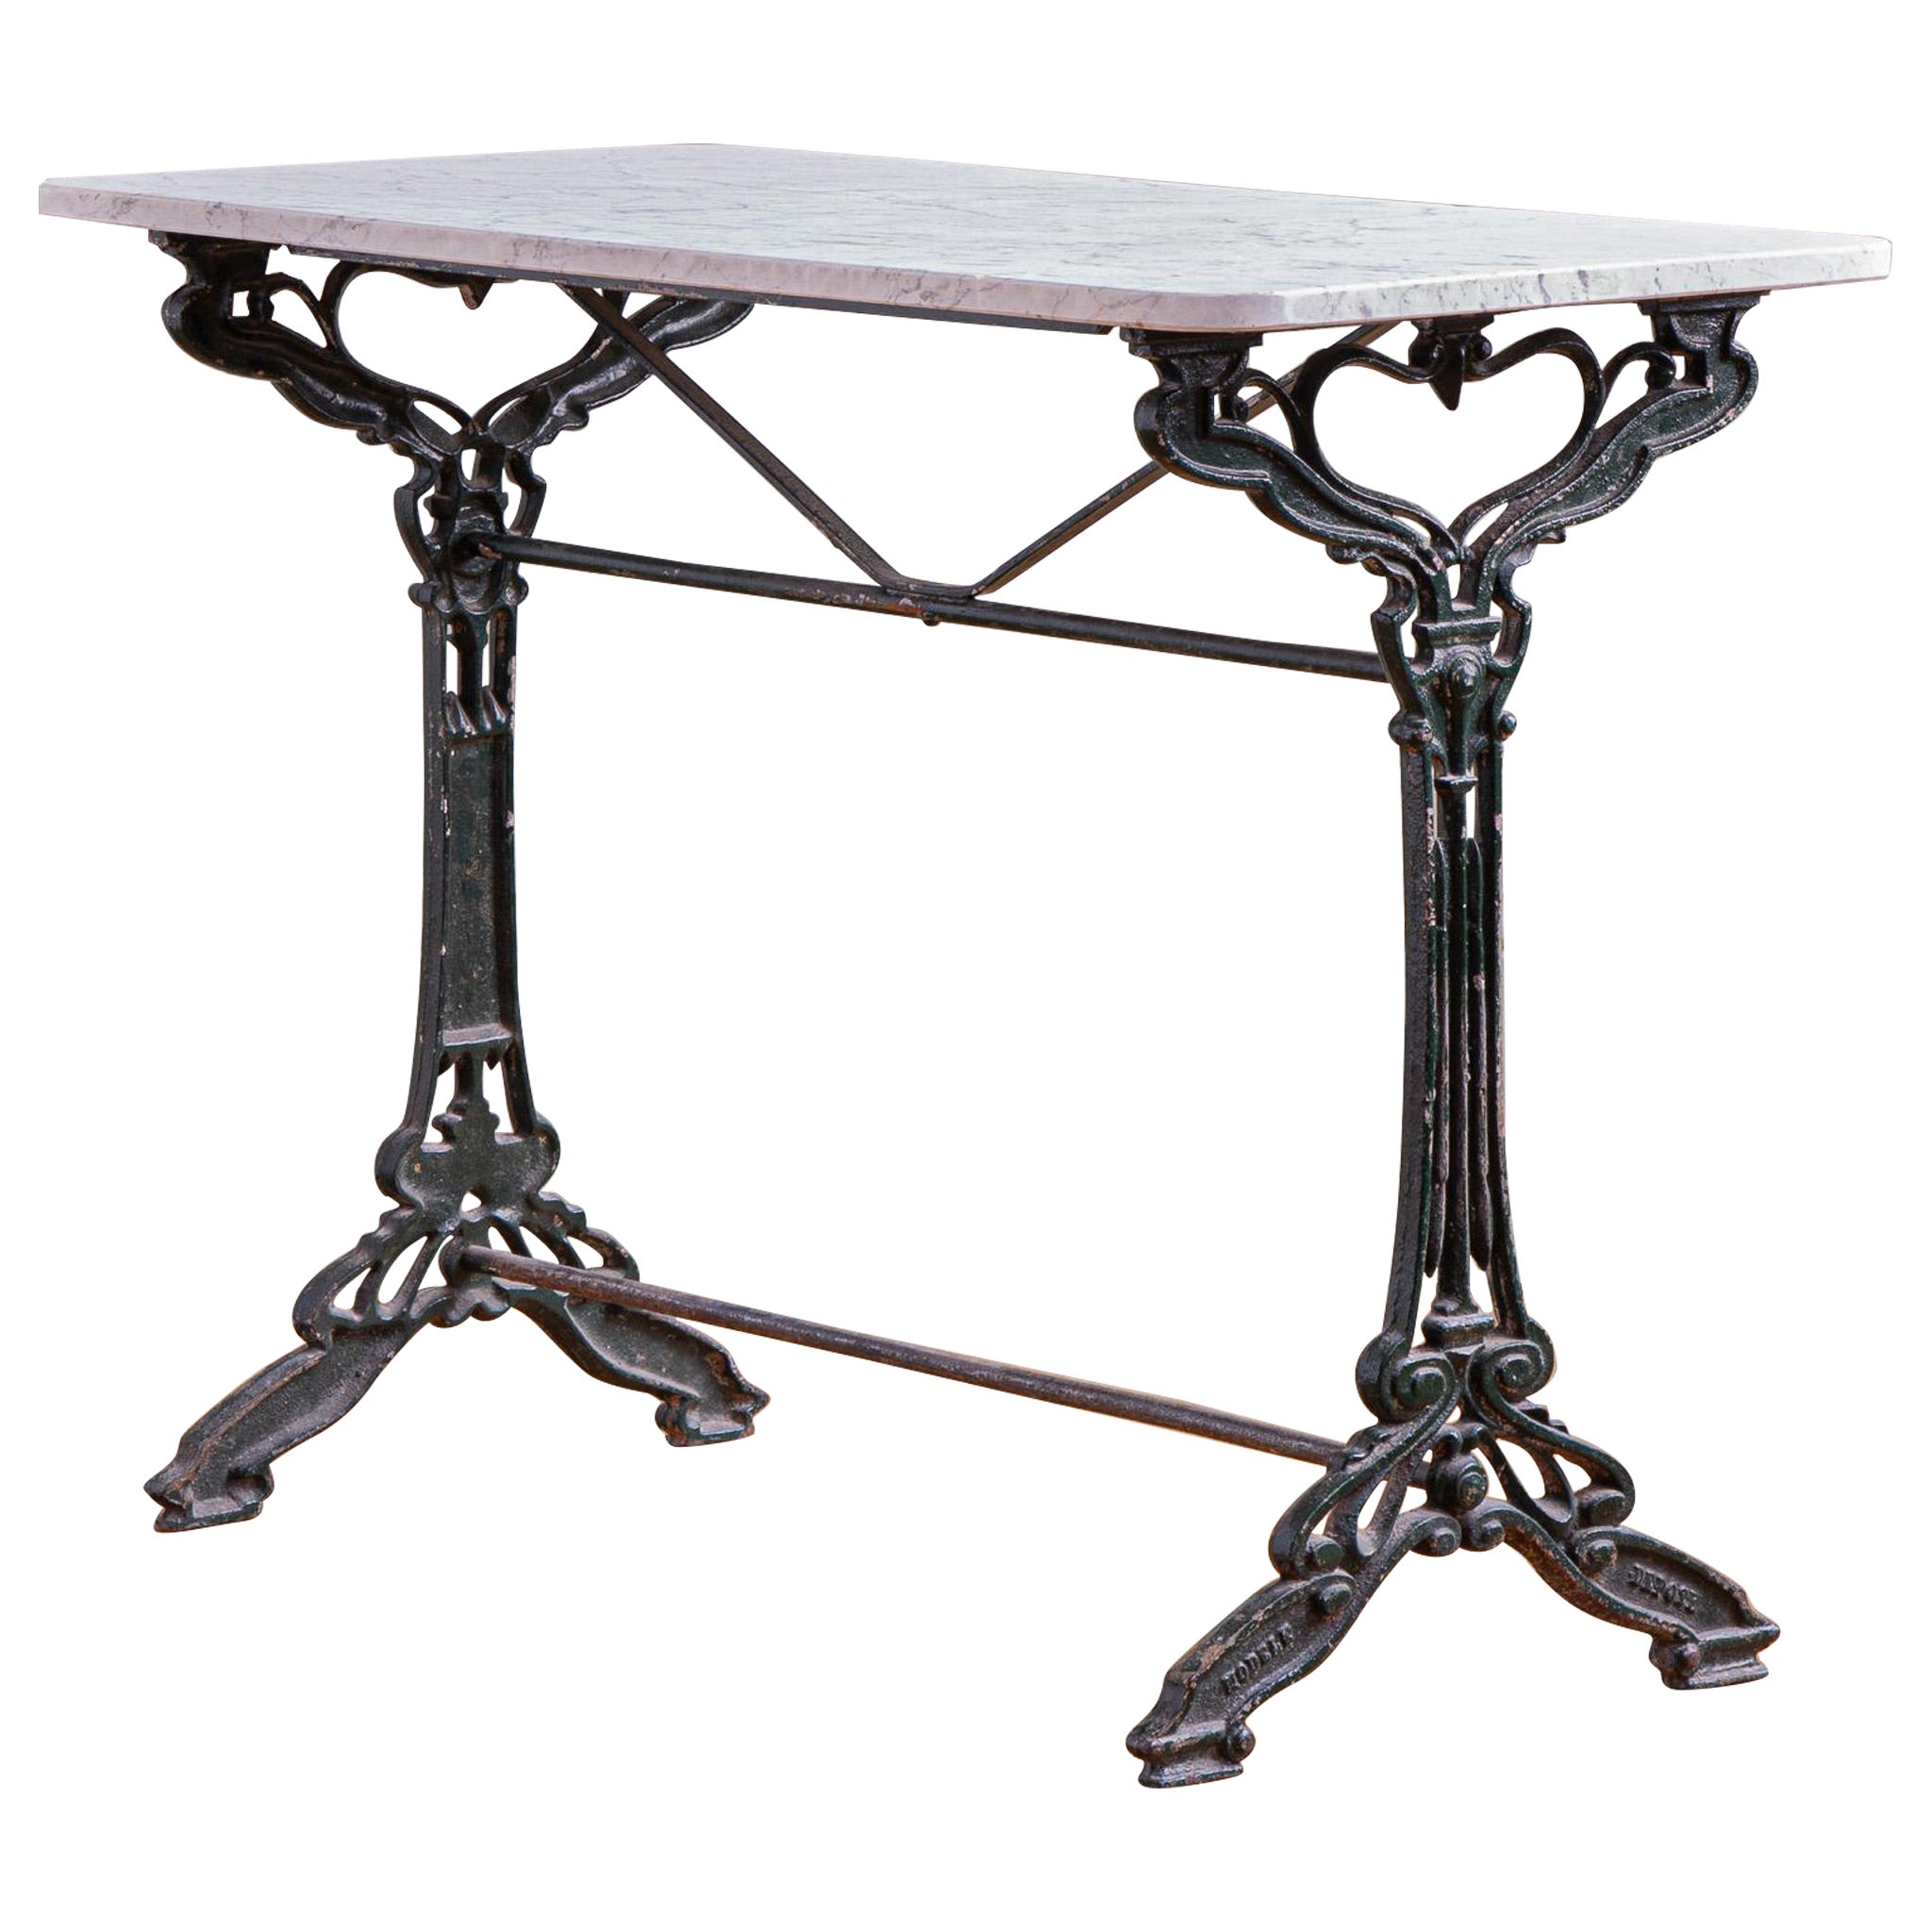 Antique Art Nouveau Period French Bistro Cafe / Garden Table With Marble Top For Sale